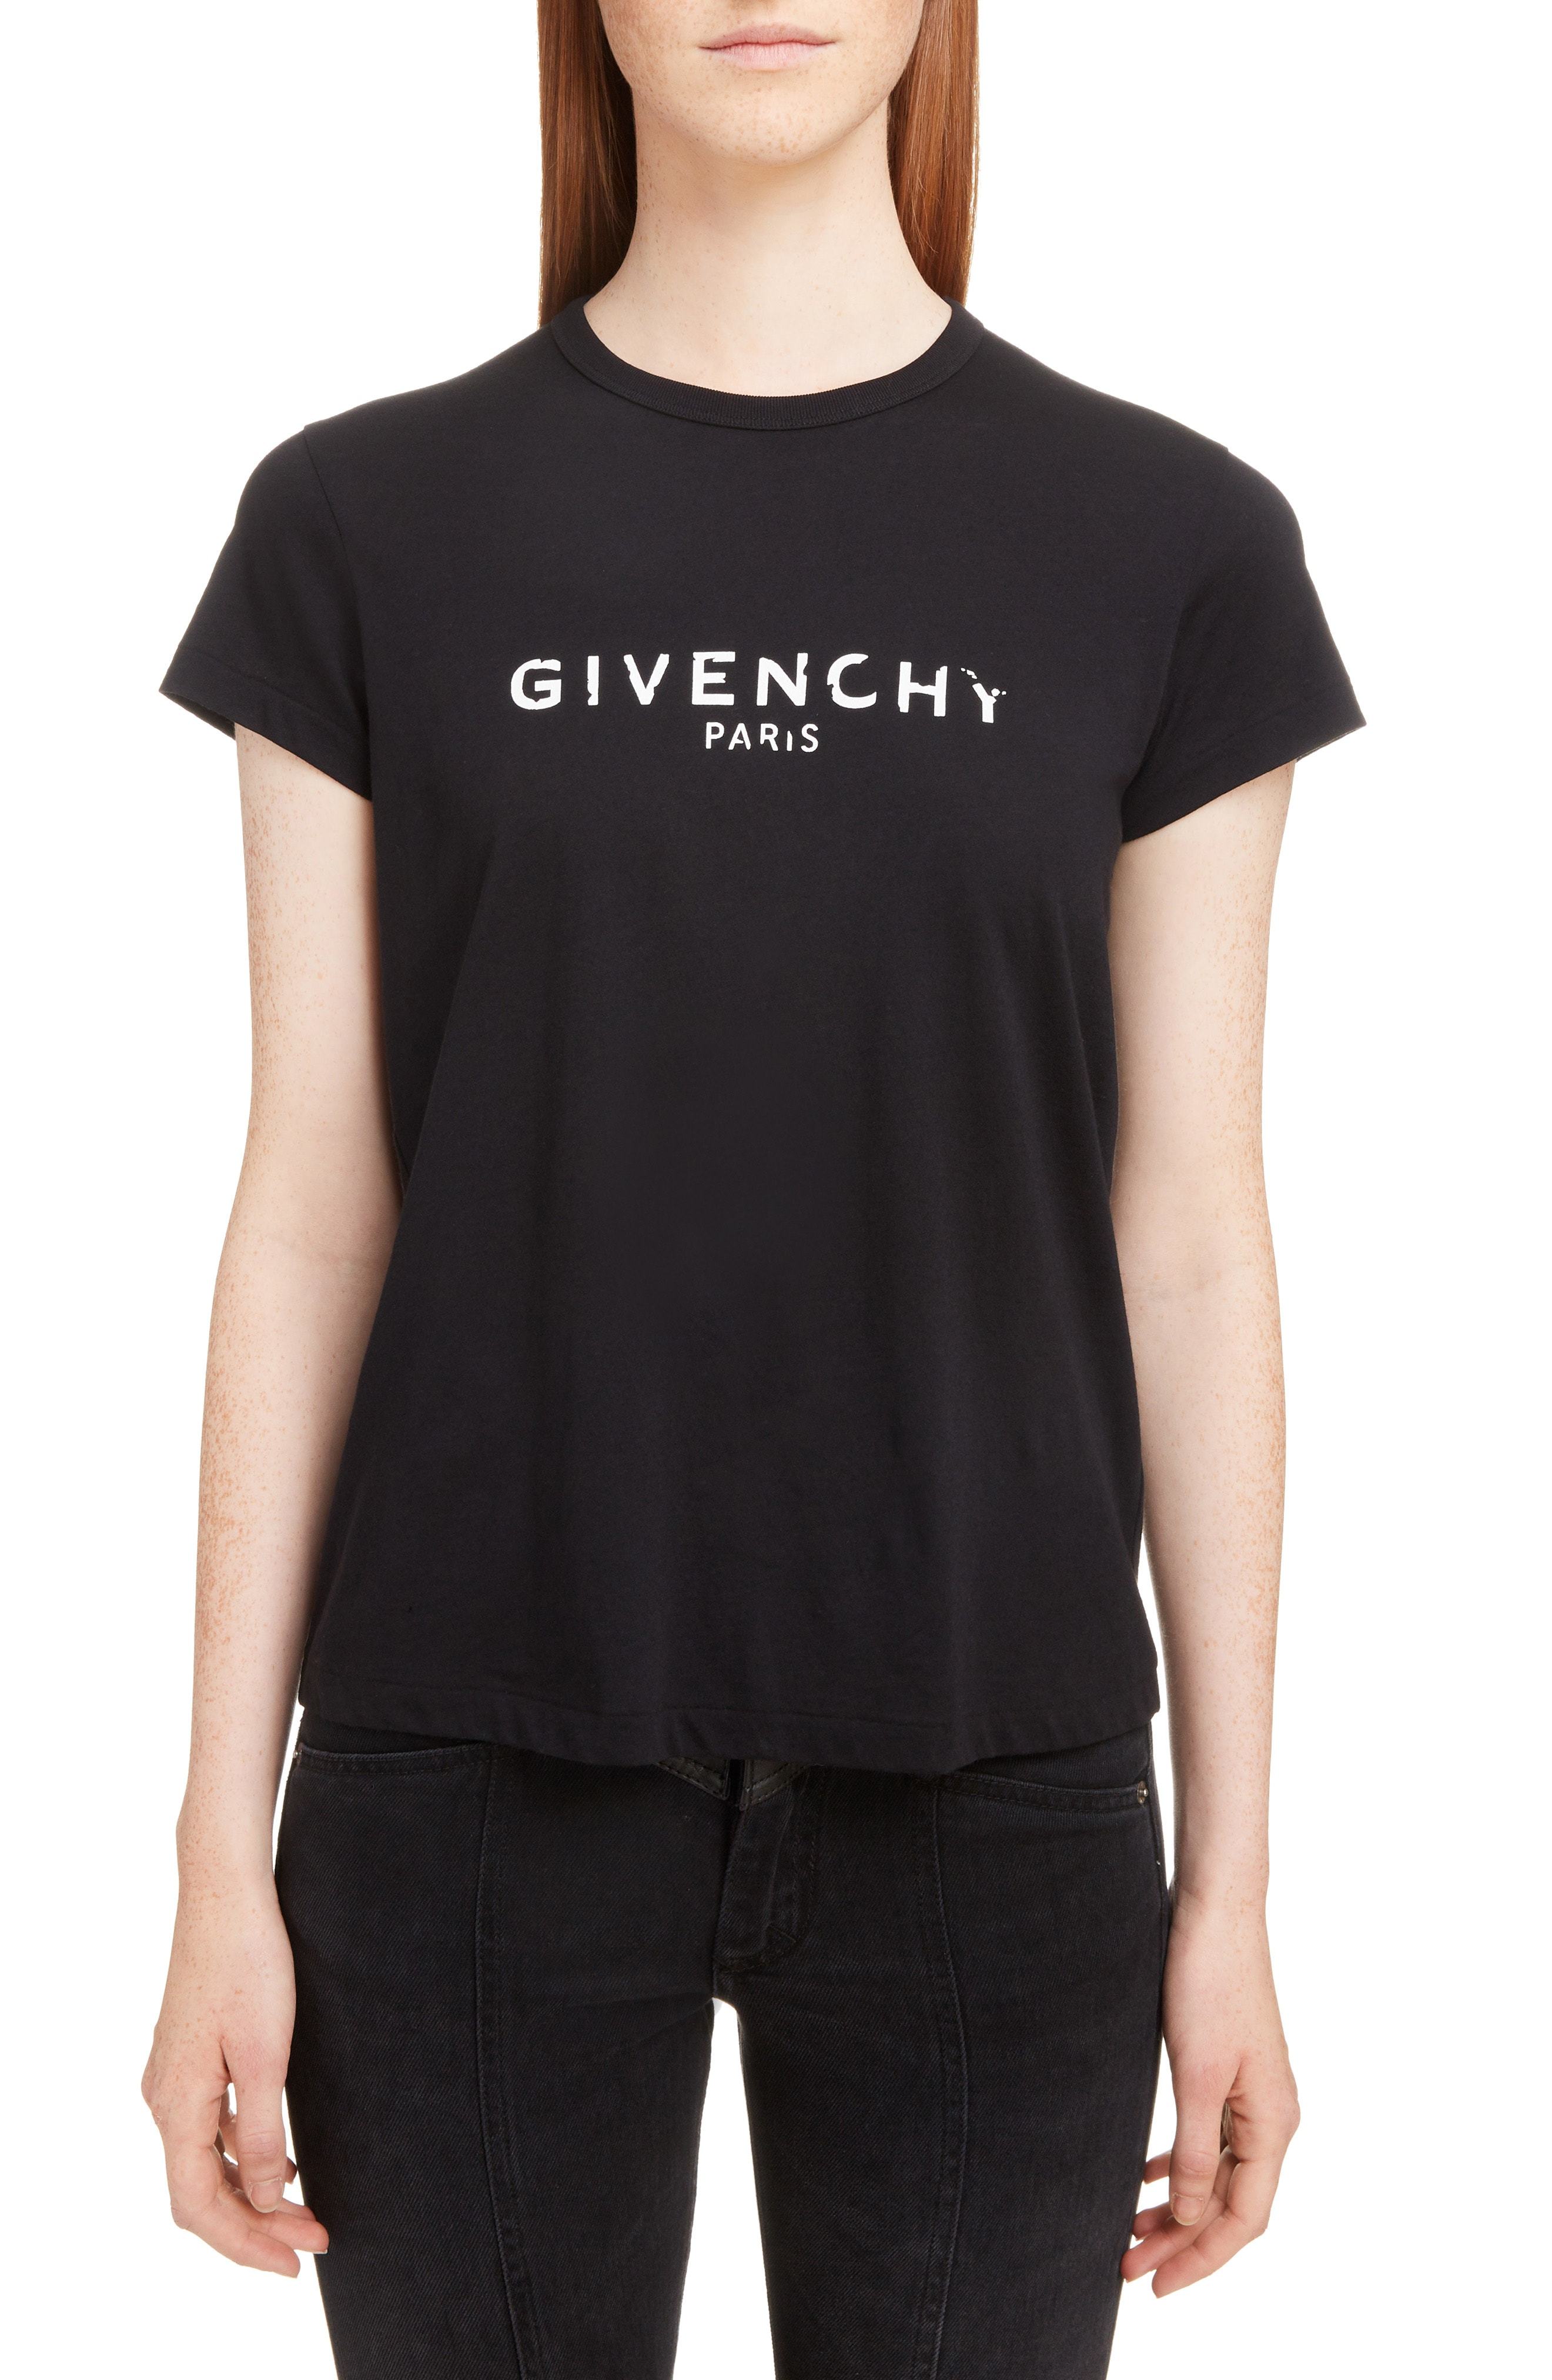 givenchy distressed logo tee